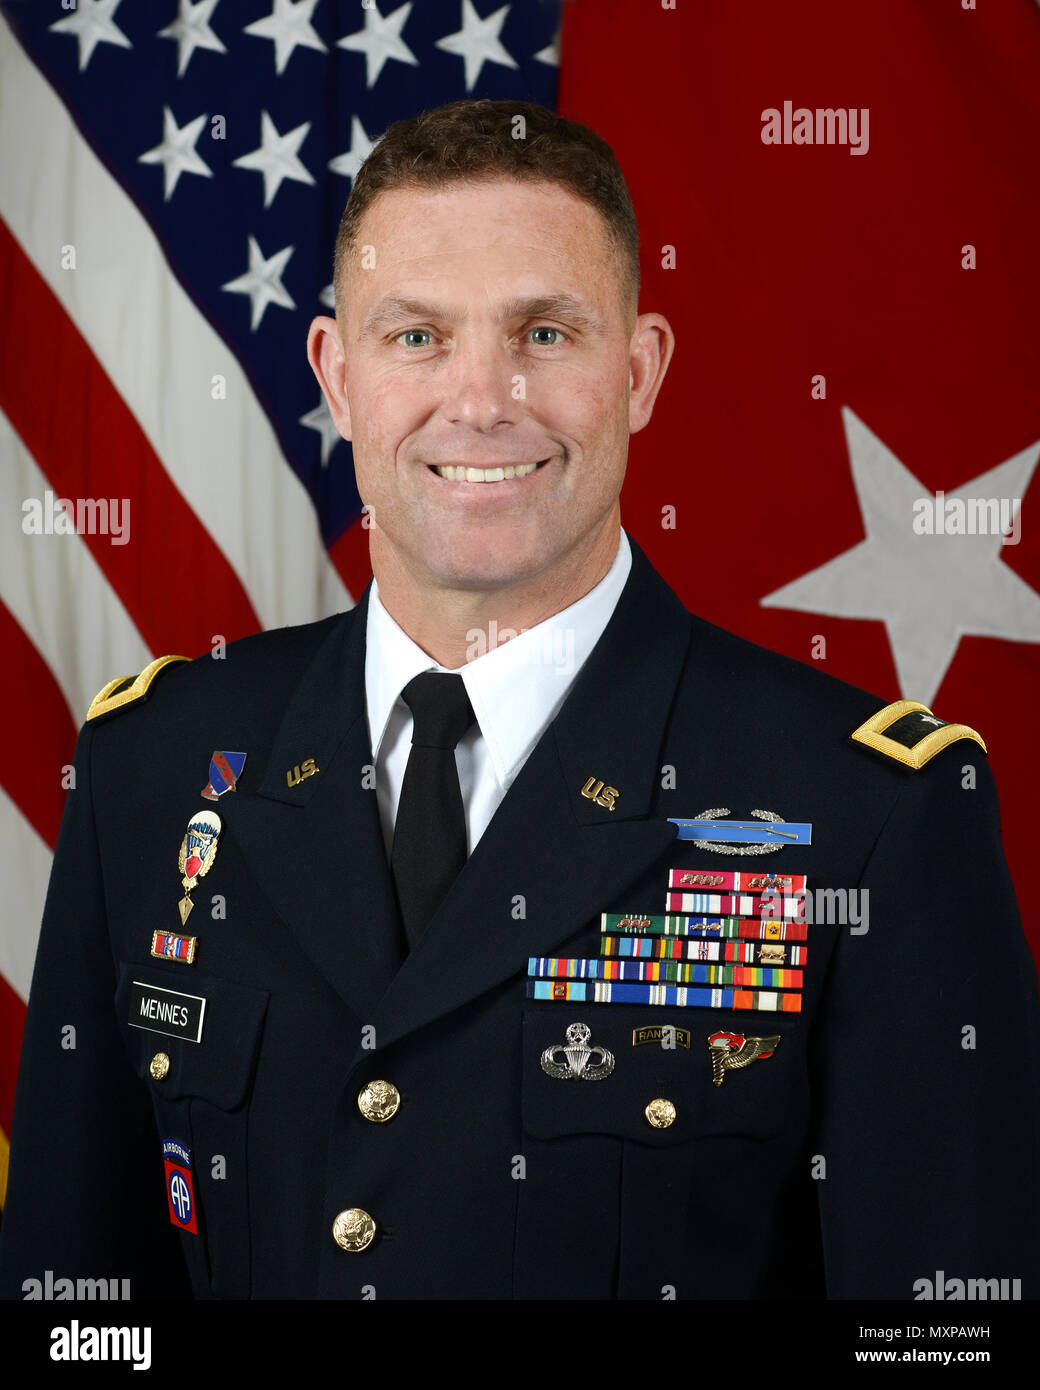 Brig. Gen. Brian J. Mennes, Headquarters, Department of the Army, Director of Joint and Integration (G-8), poses for a command portrait in the Army portrait studio at the Pentagon in Arlington, VA, Nov. 8, 2016.  (U.S. Army photo by Monica King/Released) Stock Photo